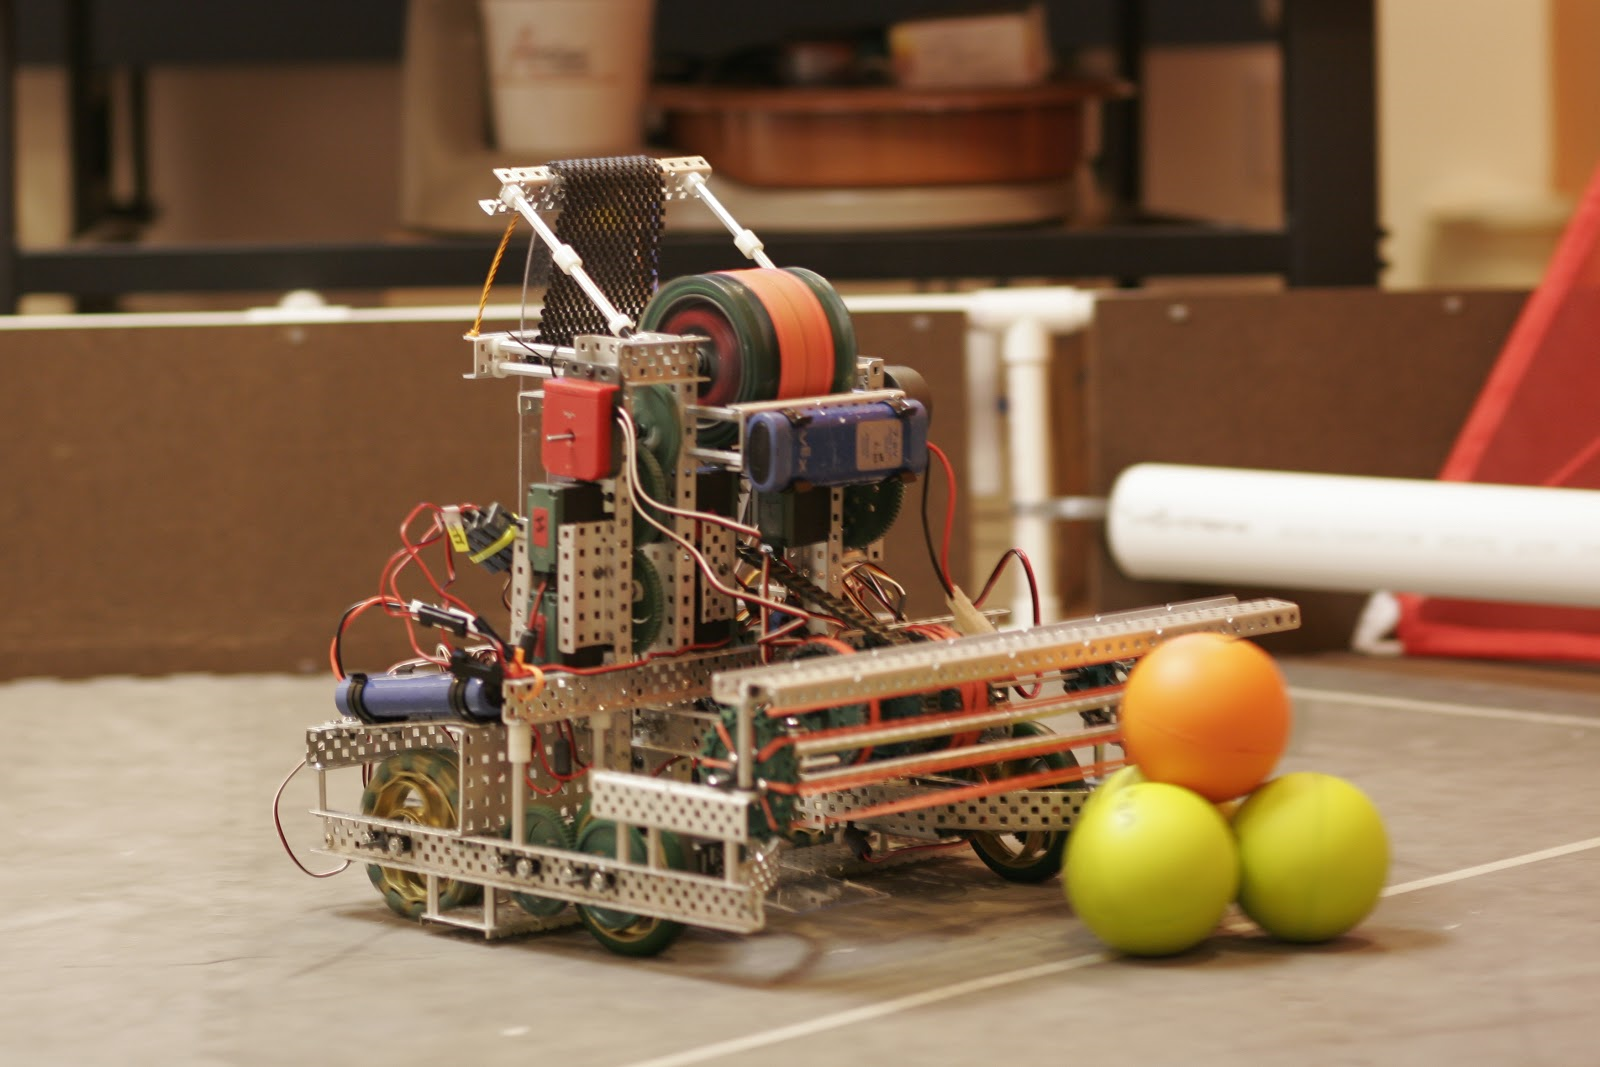 An image of a robot holding a ball with two balls on the ground.